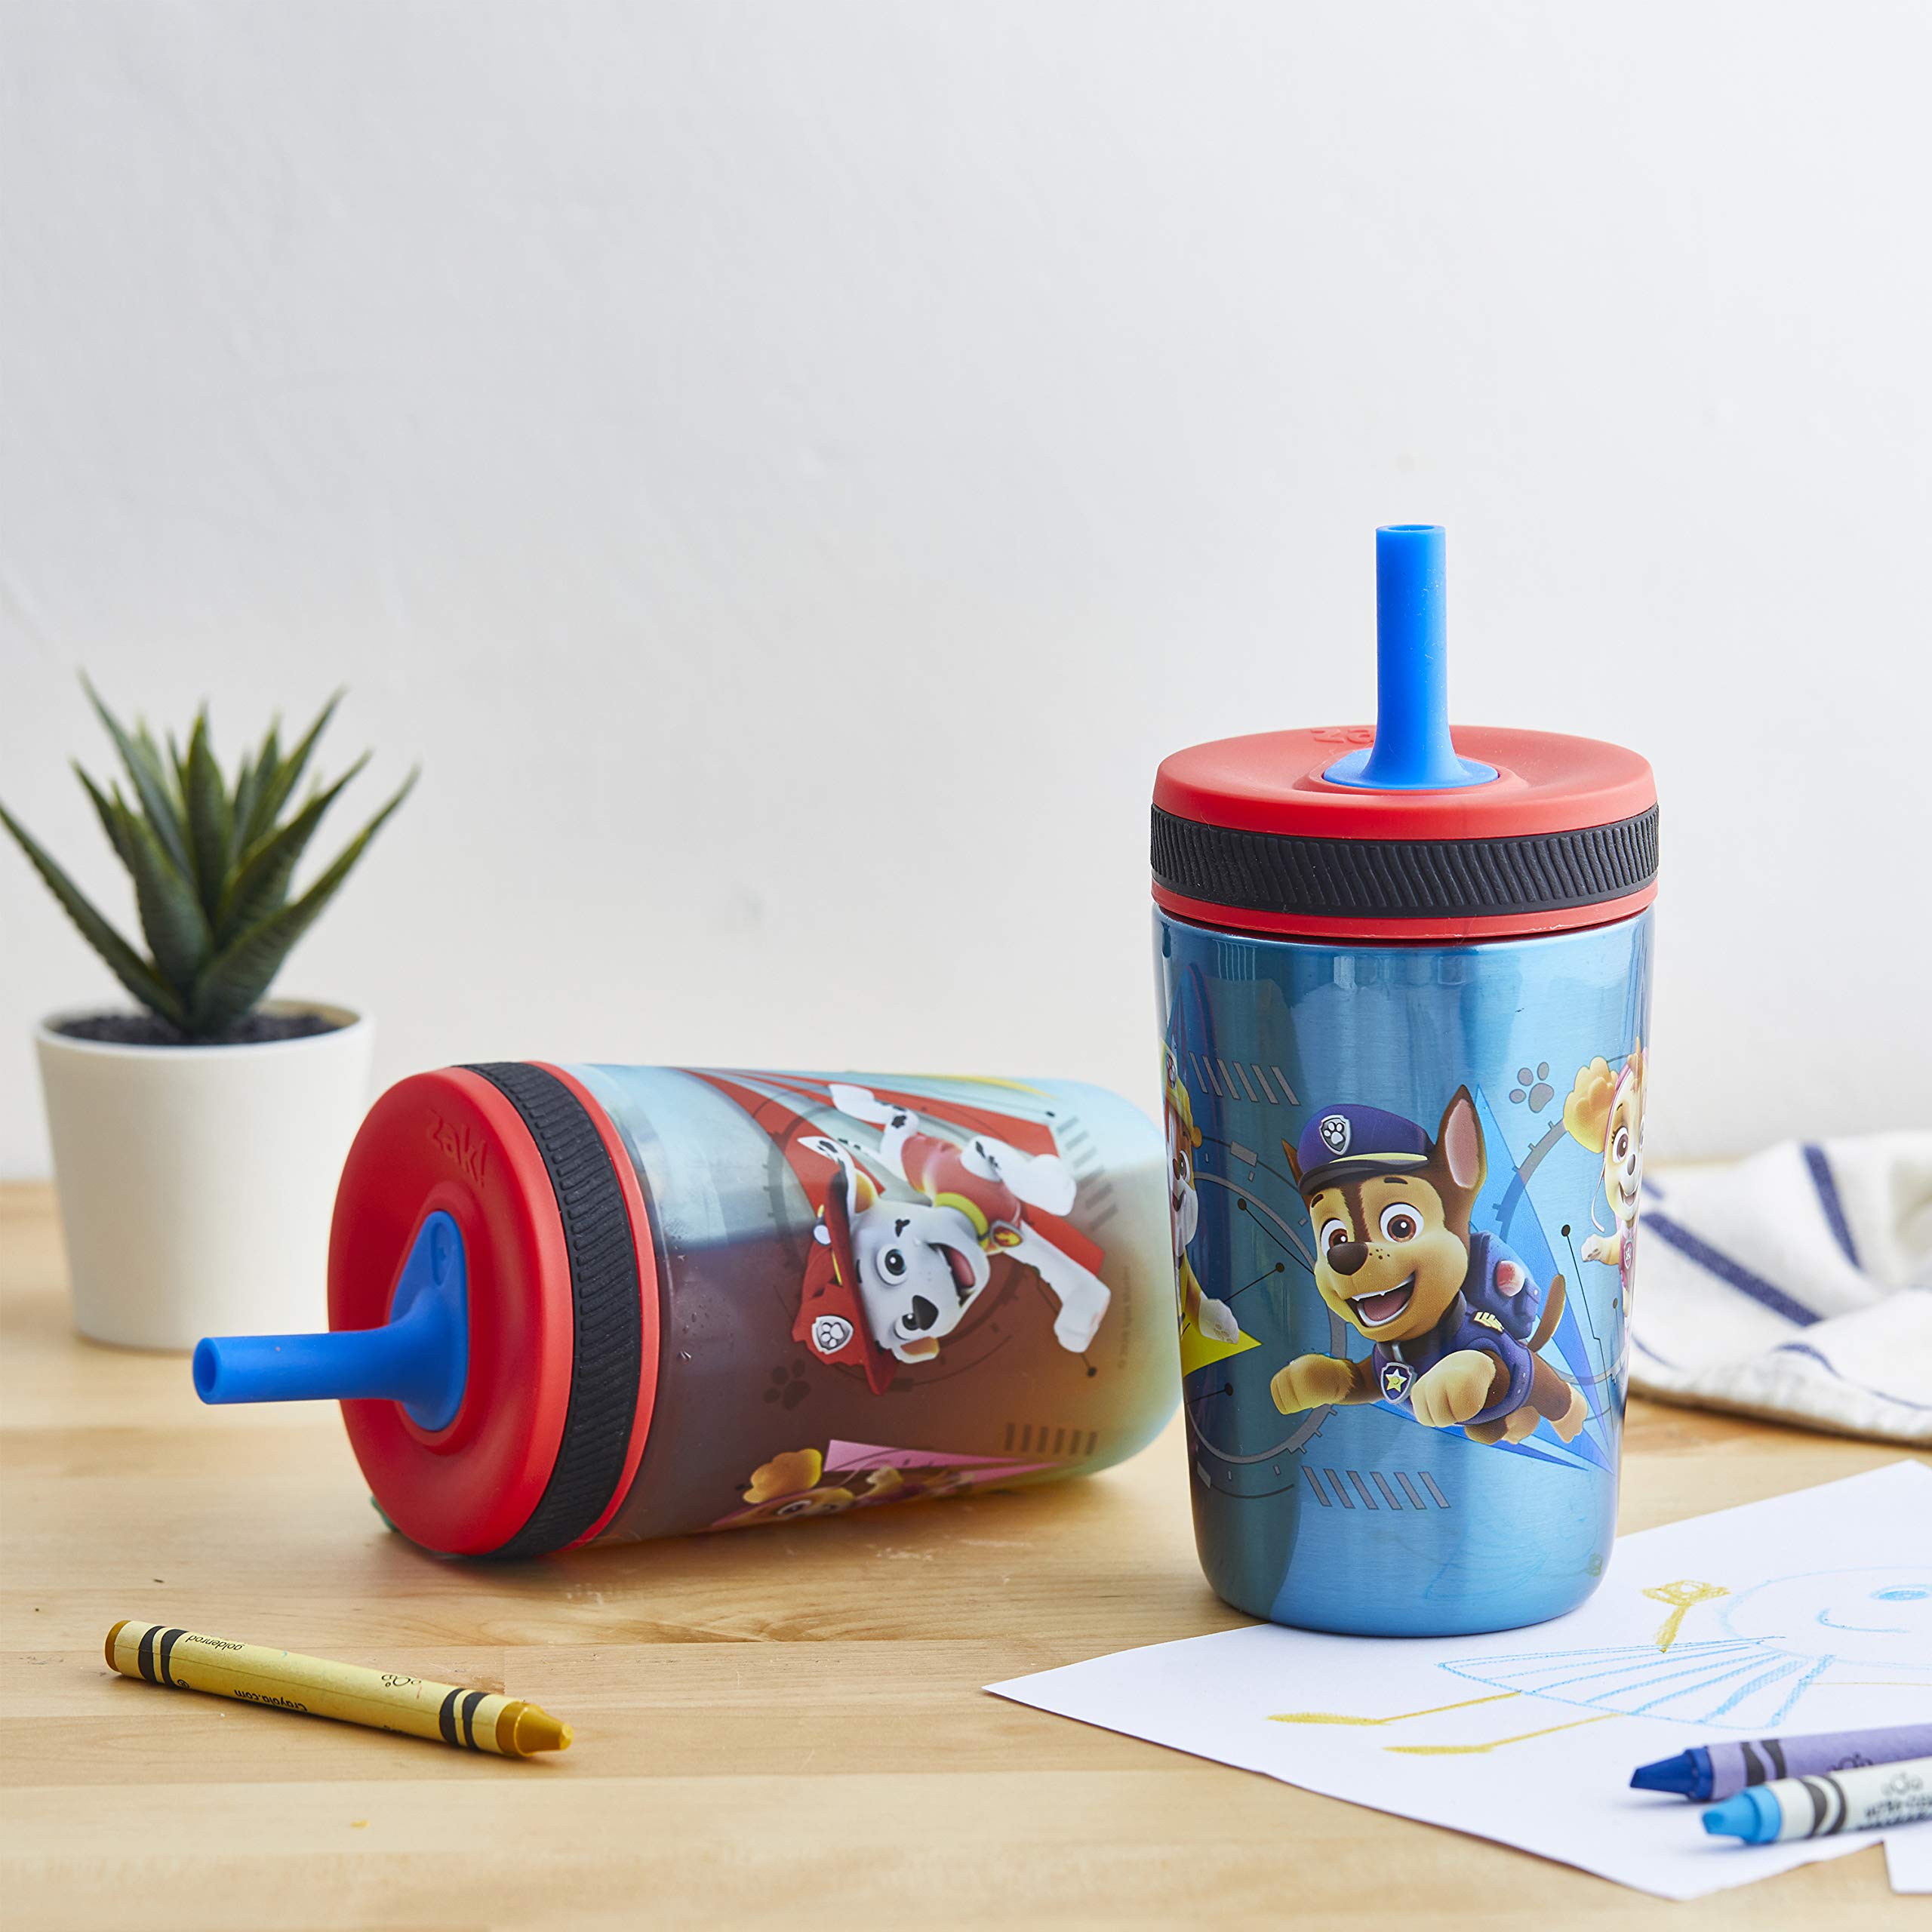 Zak Designs PAW Patrol Kelso Tumbler Set, Leak-Proof Screw-On Lid with Straw, Bundle for Kids Includes Plastic and Stainless Steel Cups with Additional Sipper (Paw Patrol- 3pc)15 fl oz